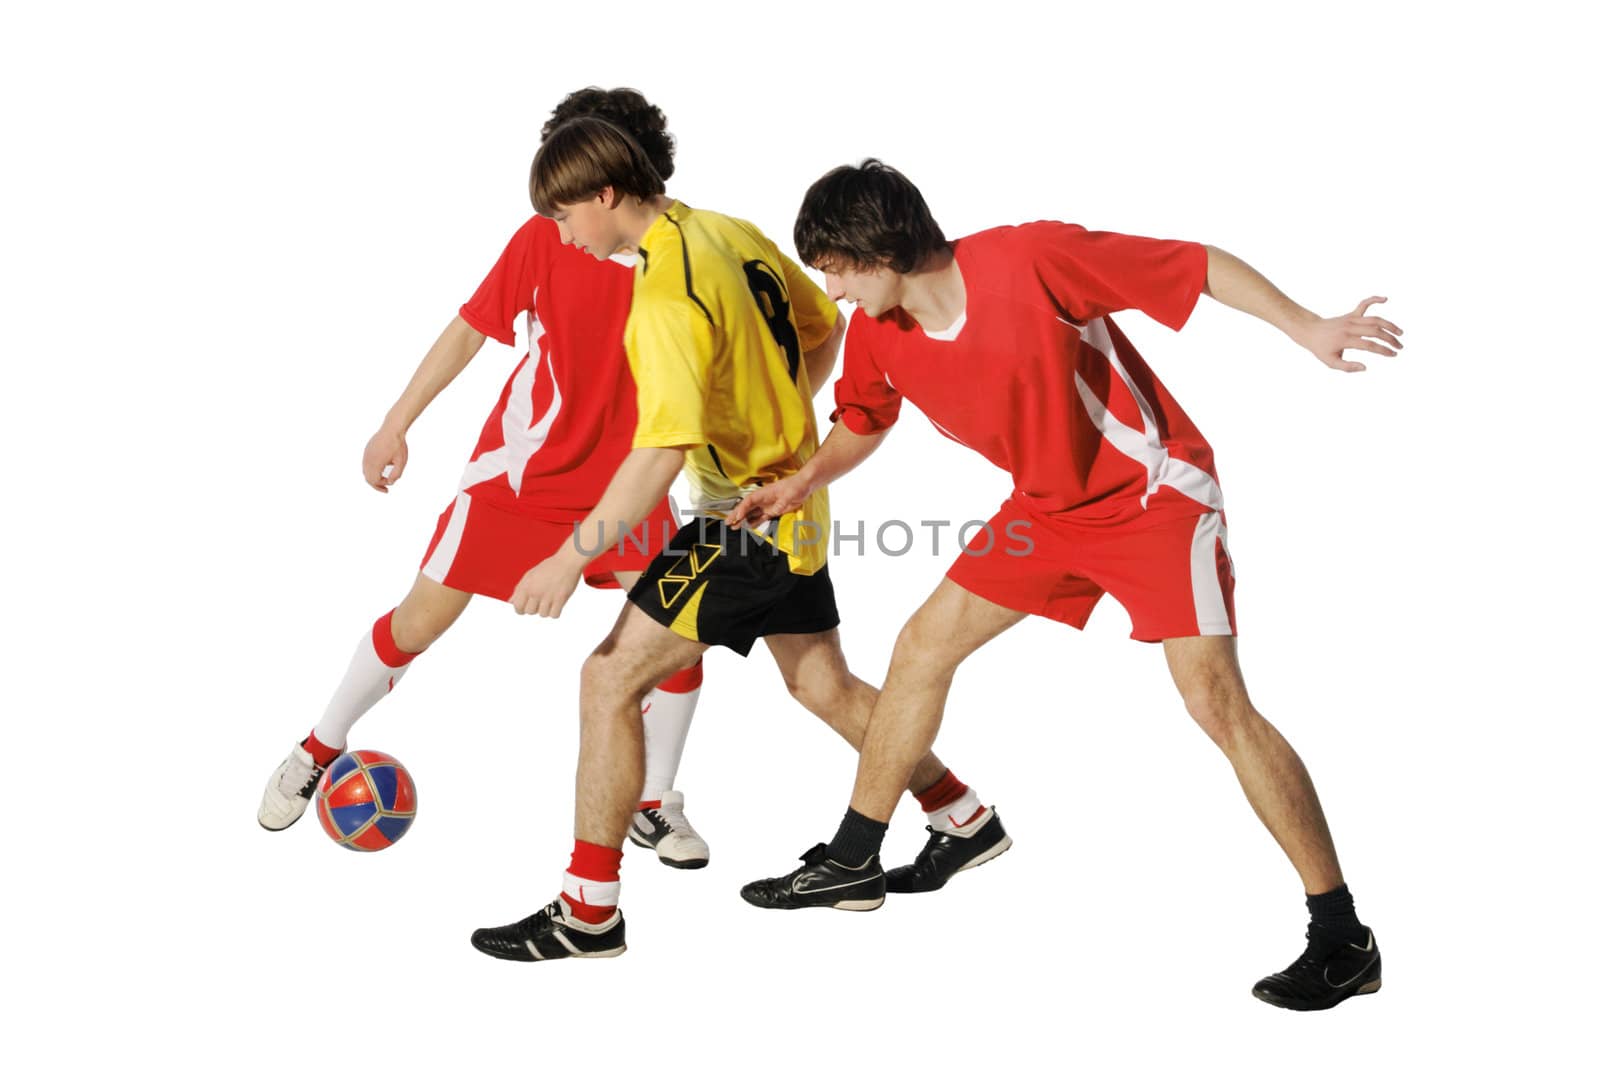 Boys with soccer ball, Footballers on the white background. (isolated)
